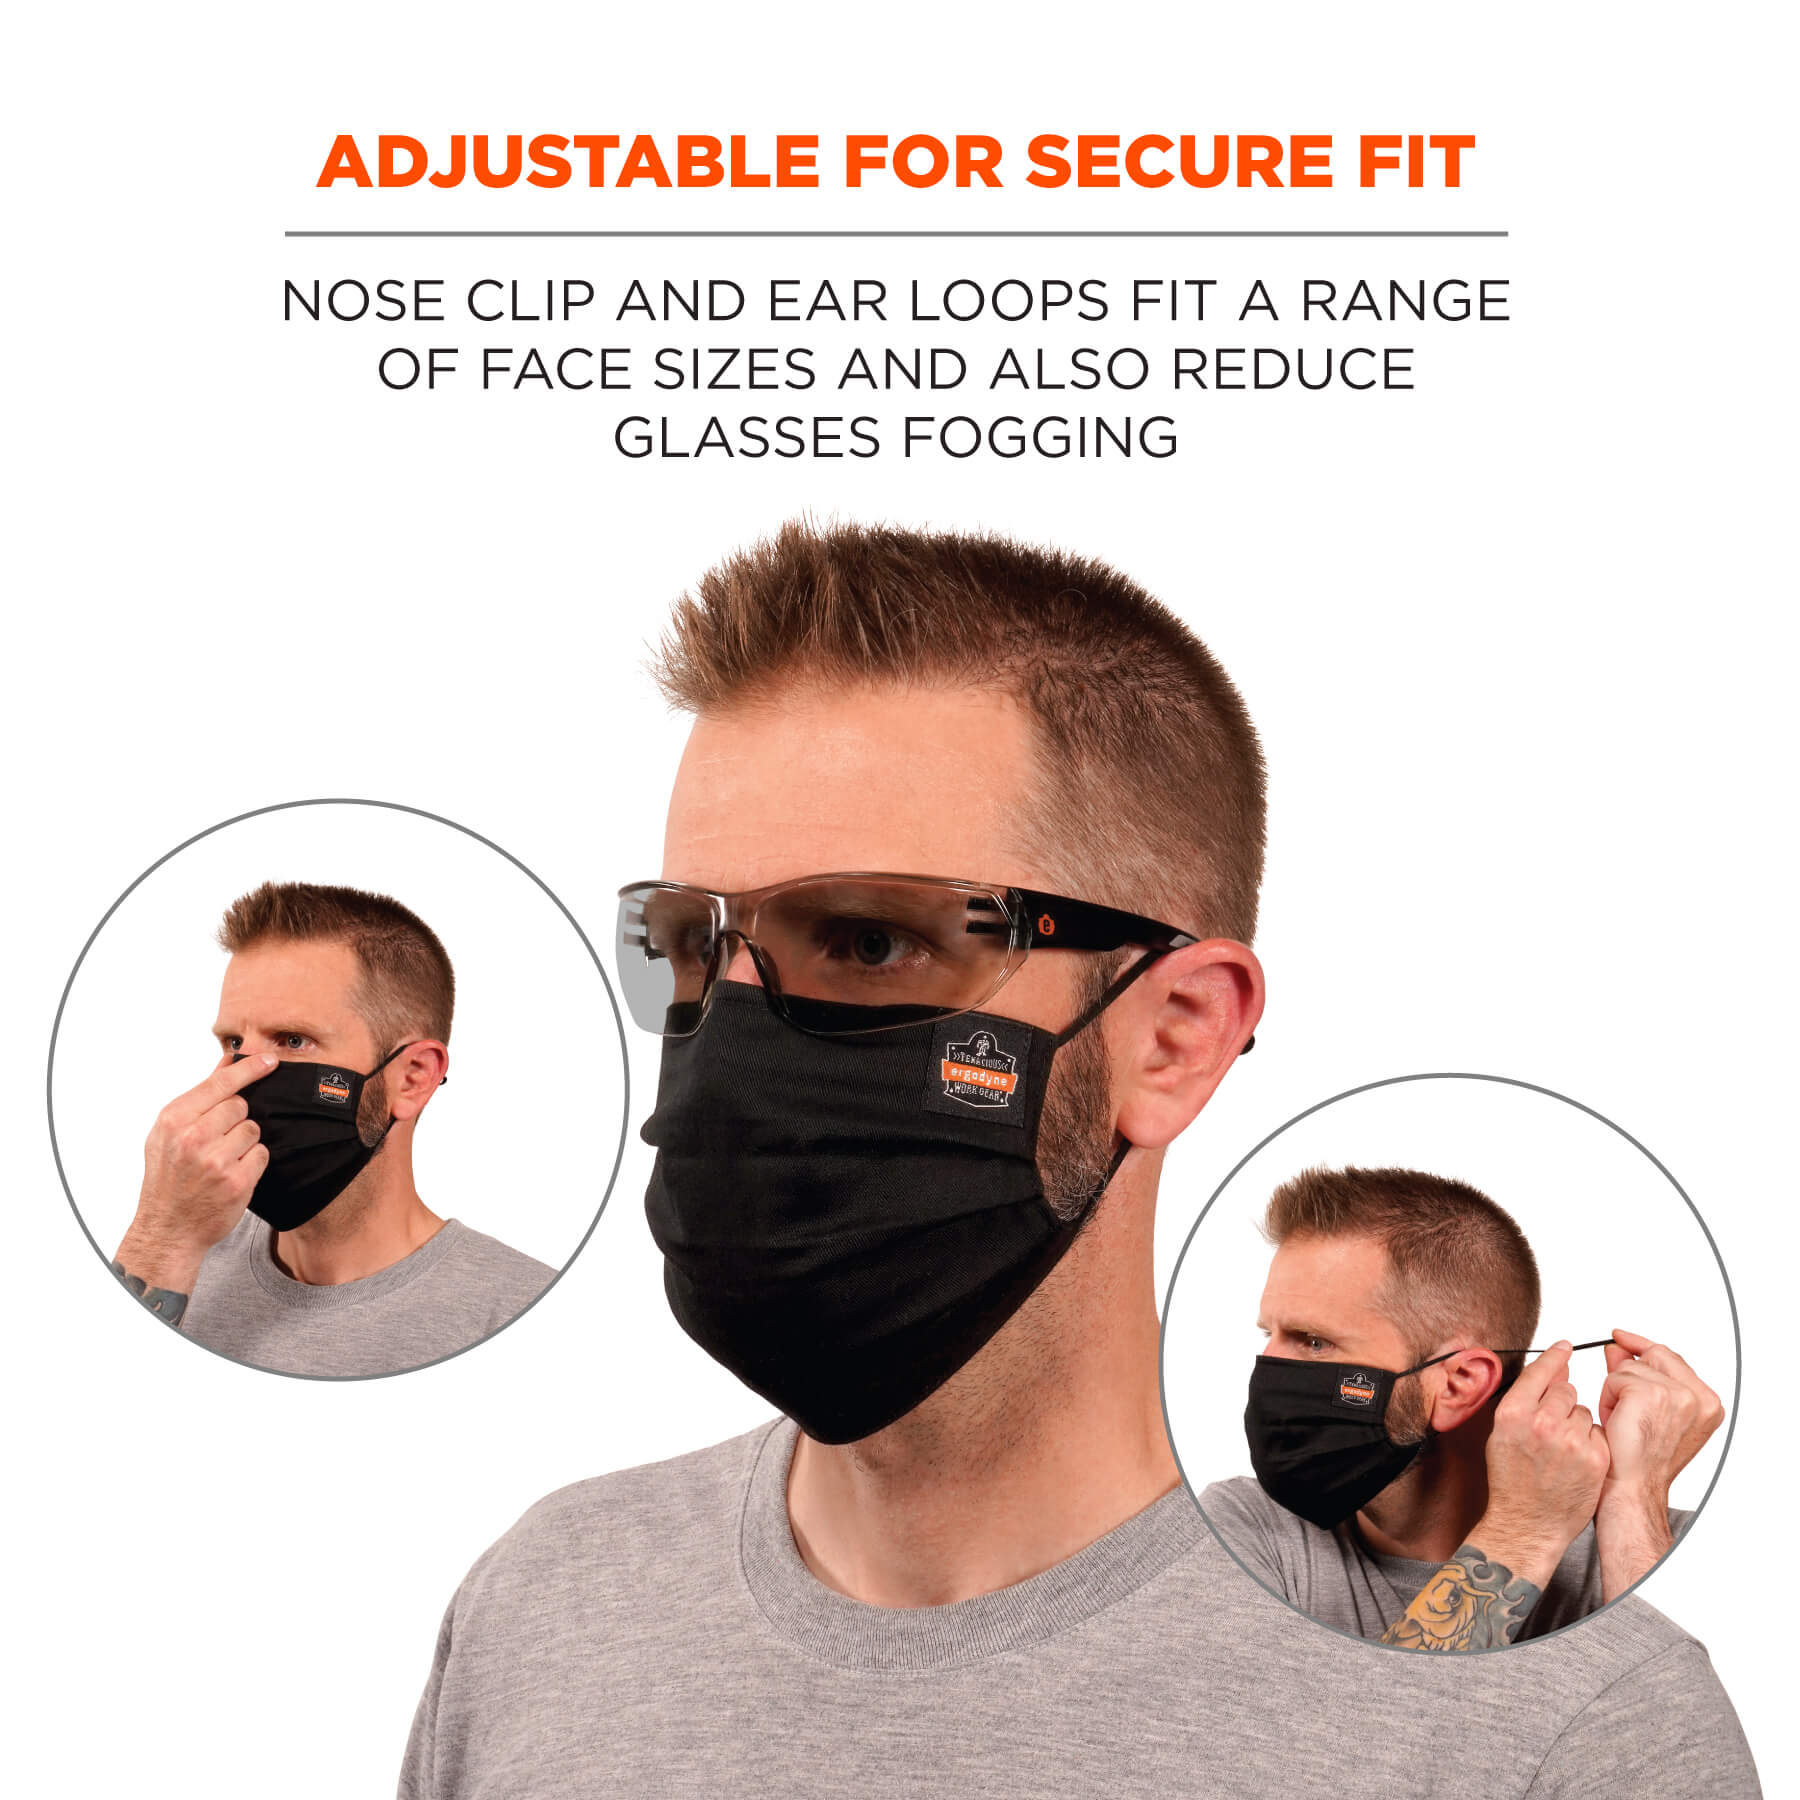 Dark Man Jacket Sunglasses His Head Wears Surgical Protective Mask